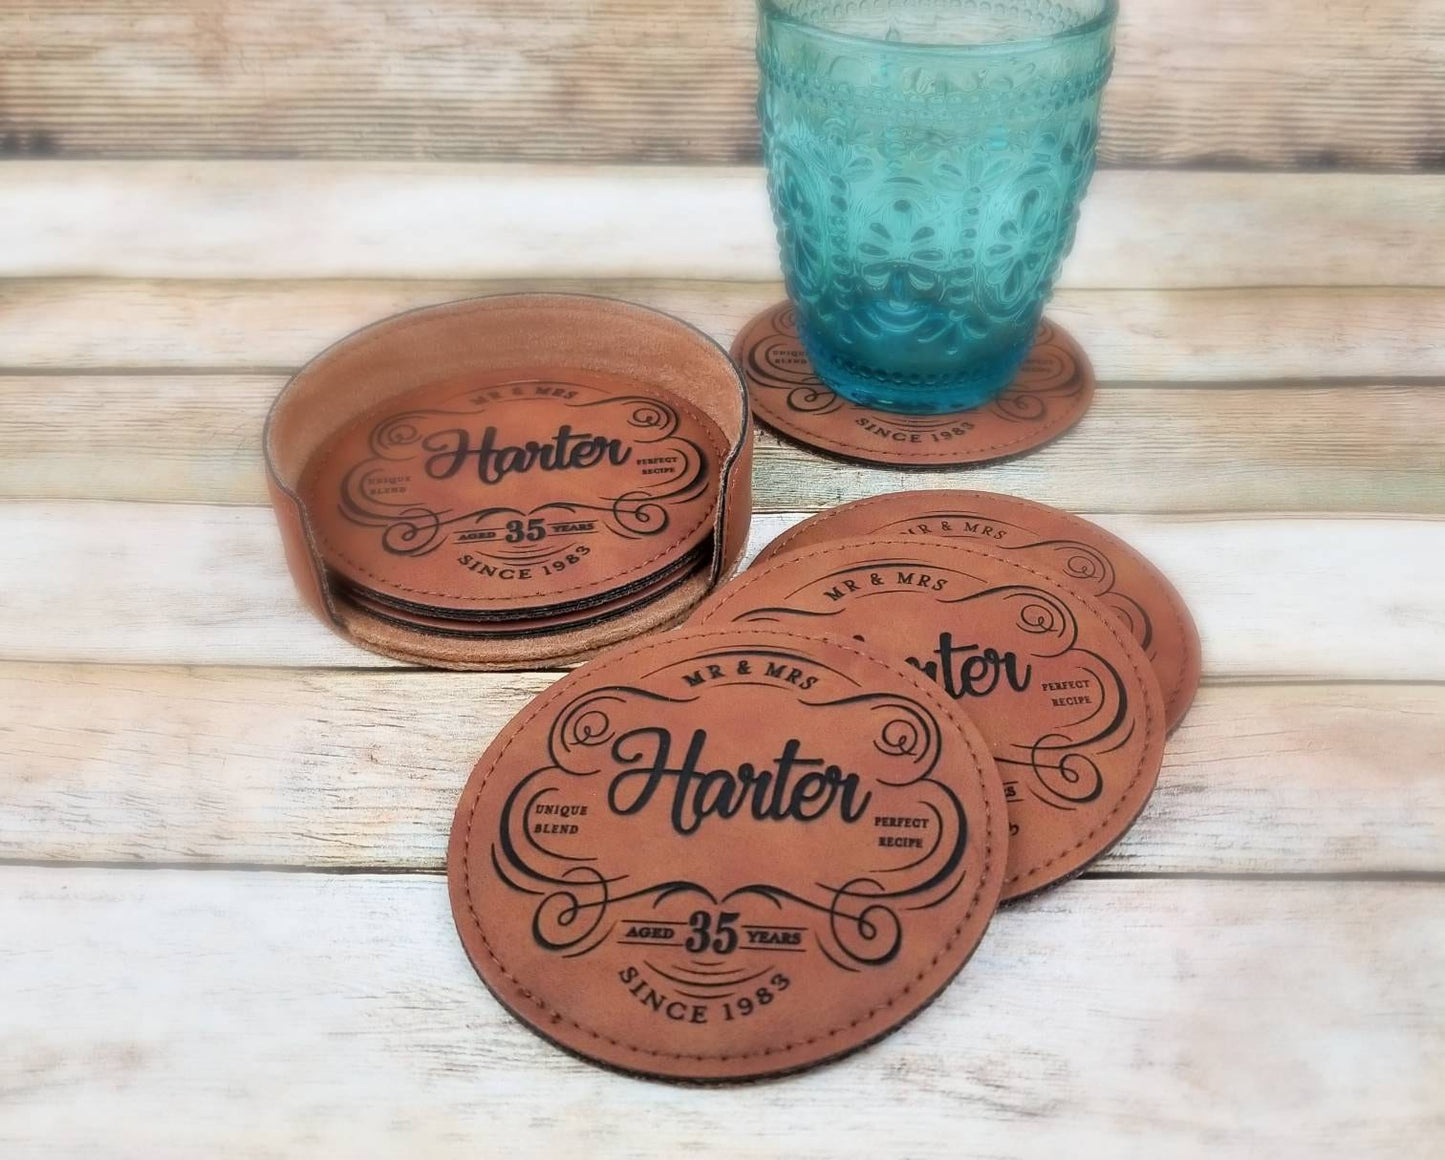 35th Anniversary Gift, Vegan Leather Coaster Set Personalized